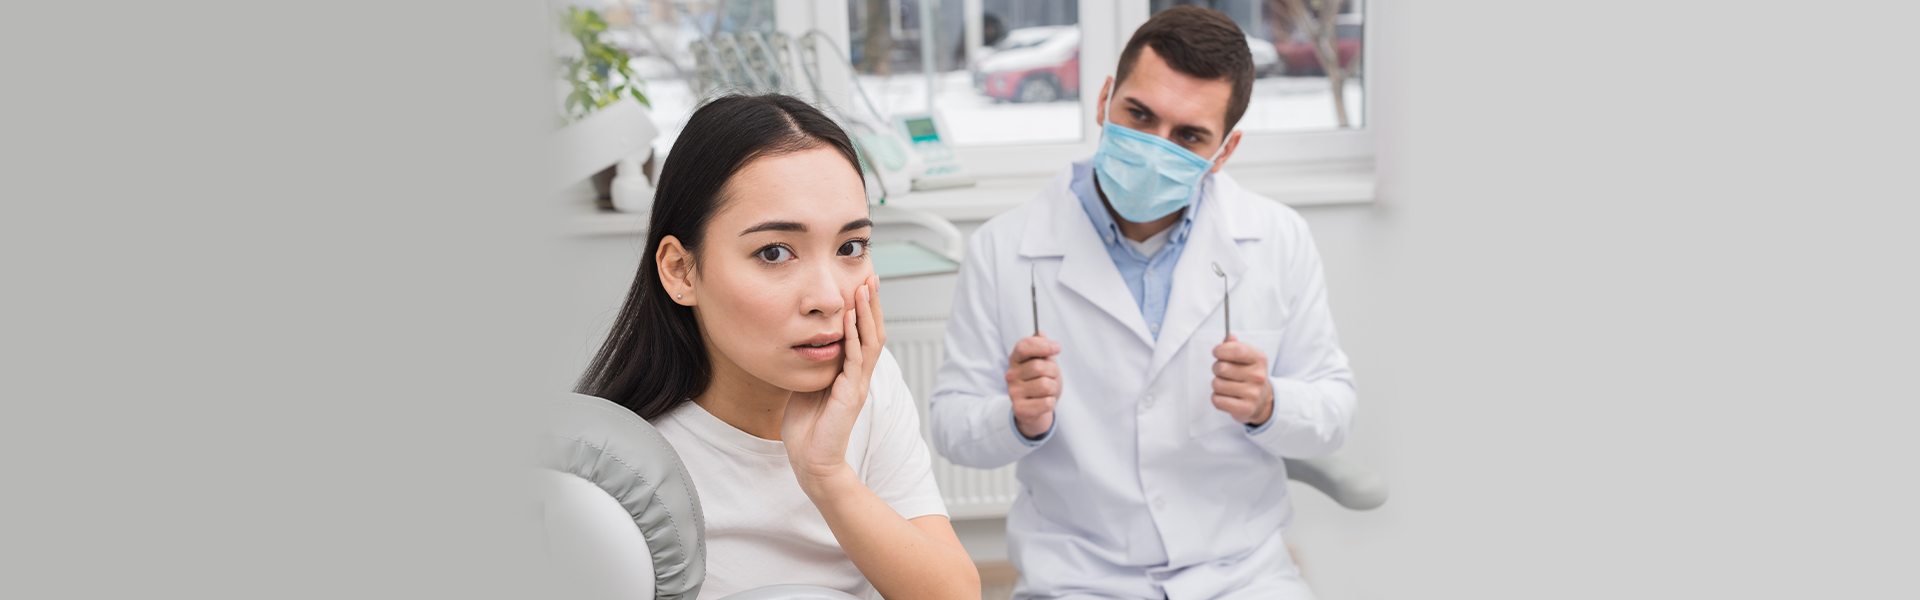 Tooth Extractions Vs. Socket Preservation